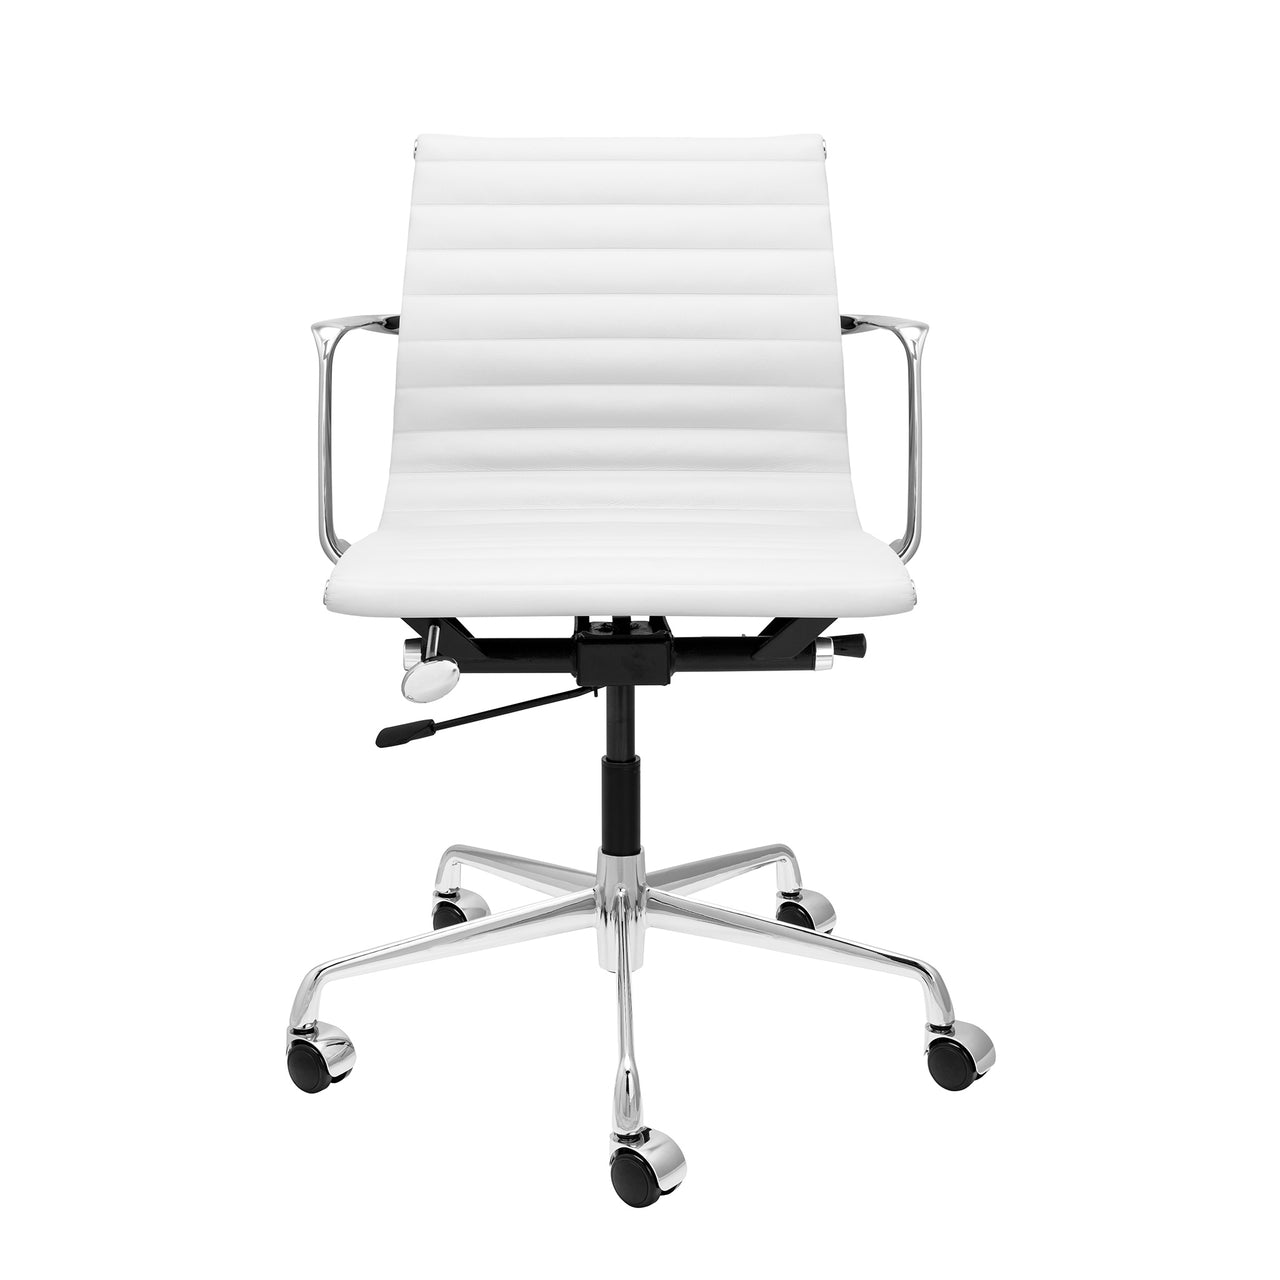 Pro Ribbed Management Chair (White Italian Leather)